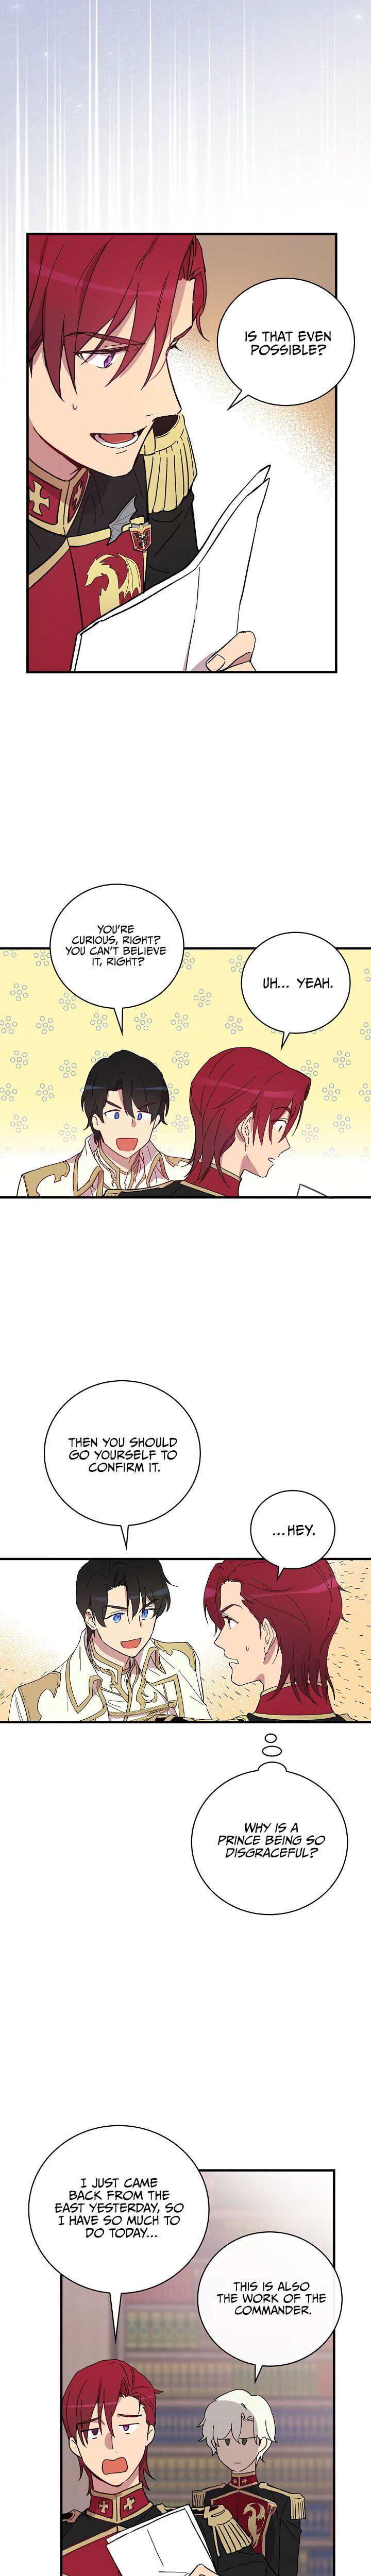 a-red-knight-does-not-blindly-follow-money-chap-3-20